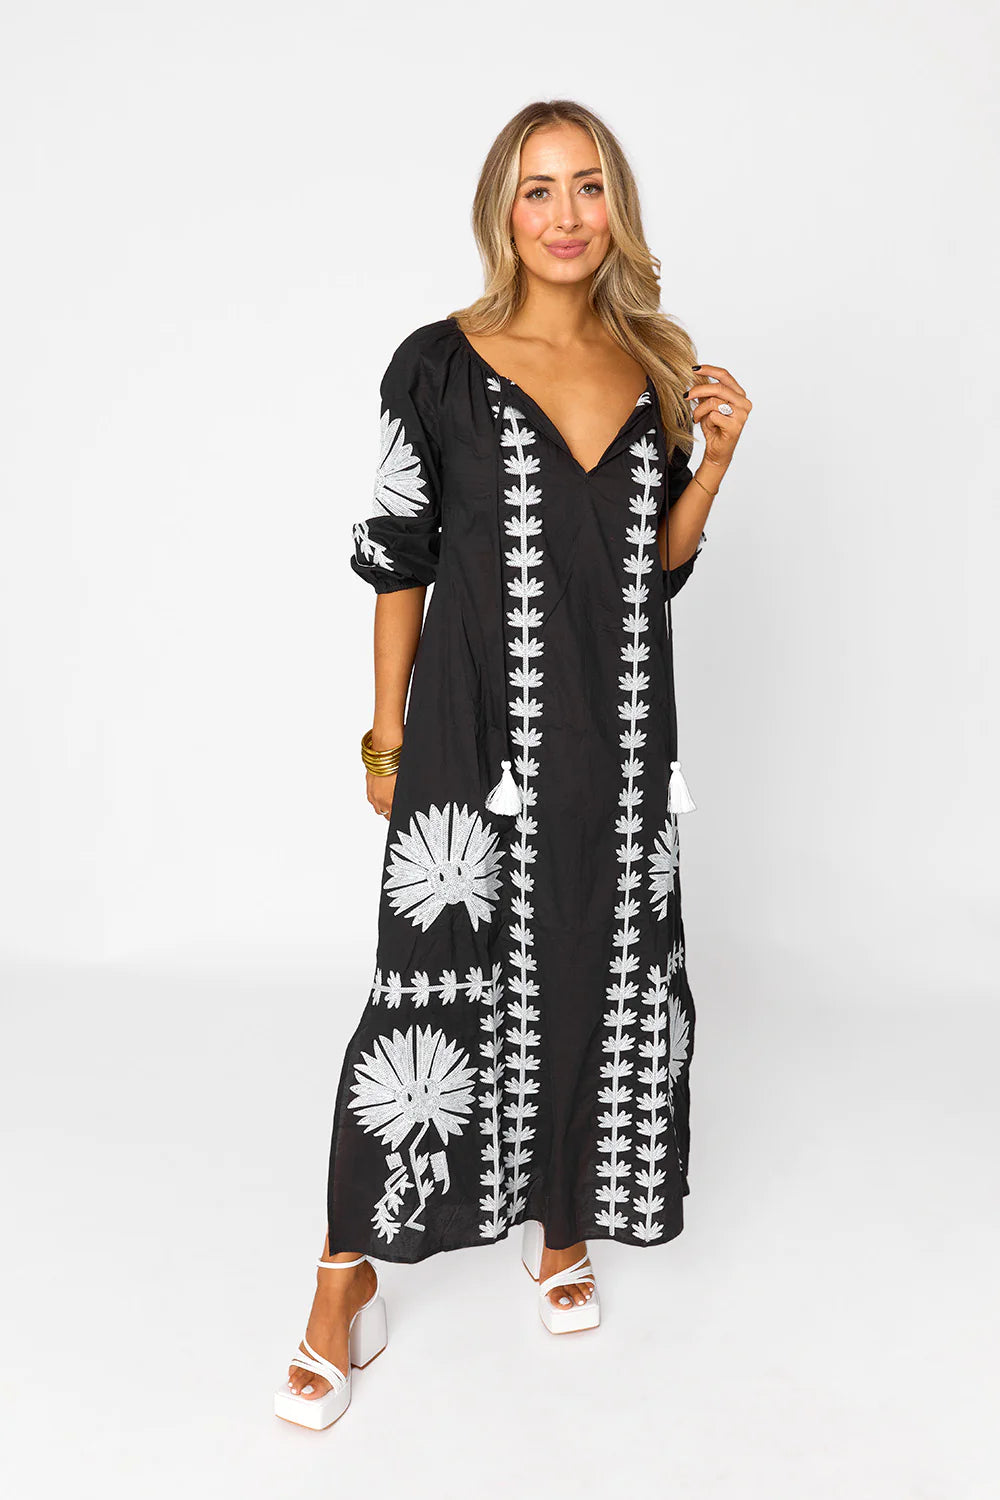 Tiffany Embroidered Caftan/ Floral Black Swimsuit coverup